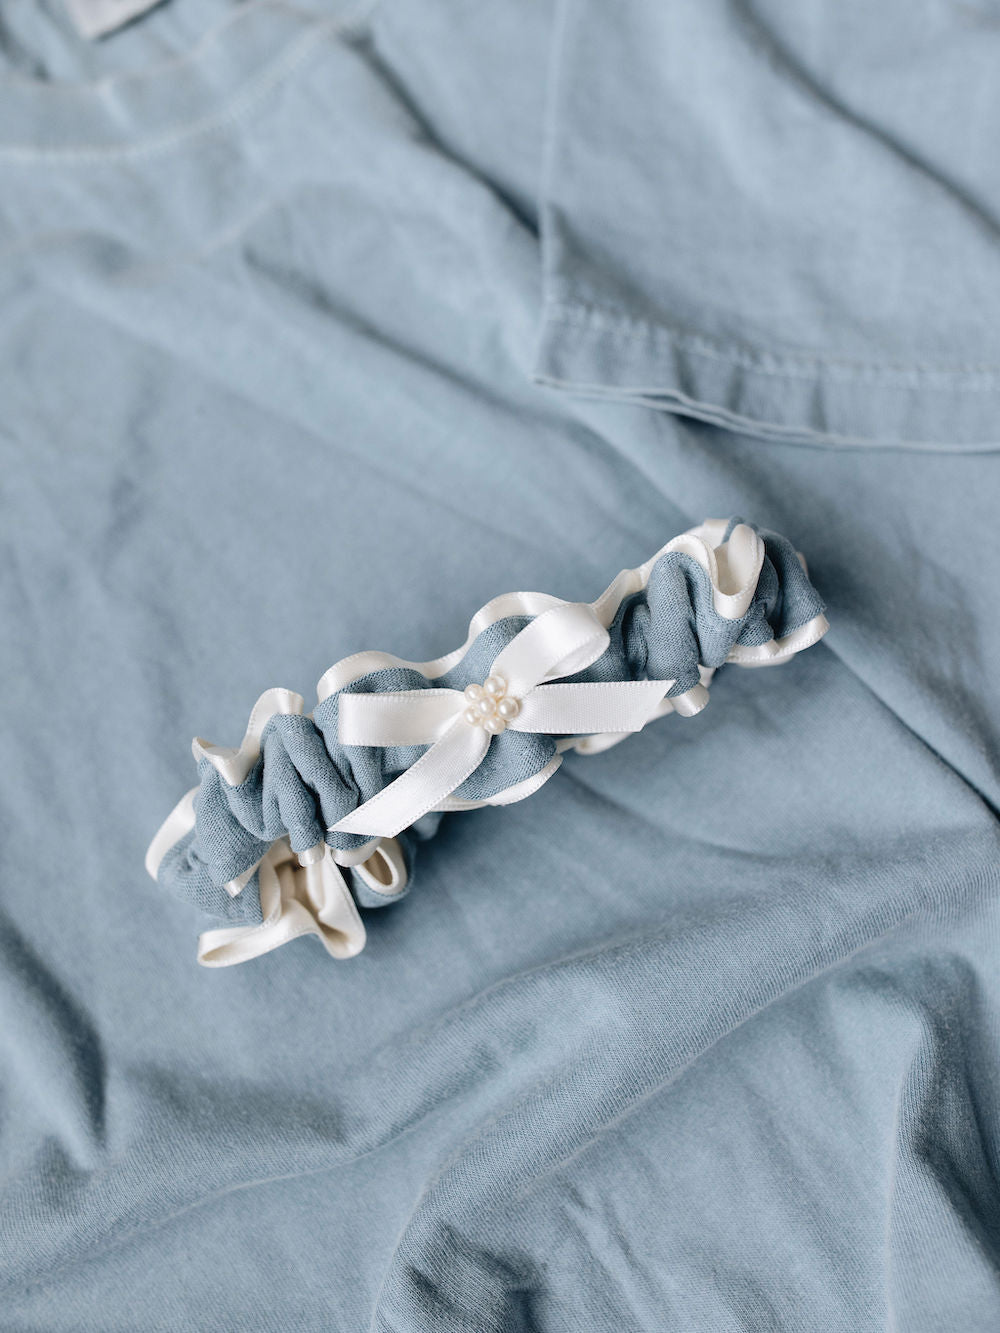 main garter made with ivory tulle and pearls and blue stripe from father's t-shirt handmade by The Garter Girl